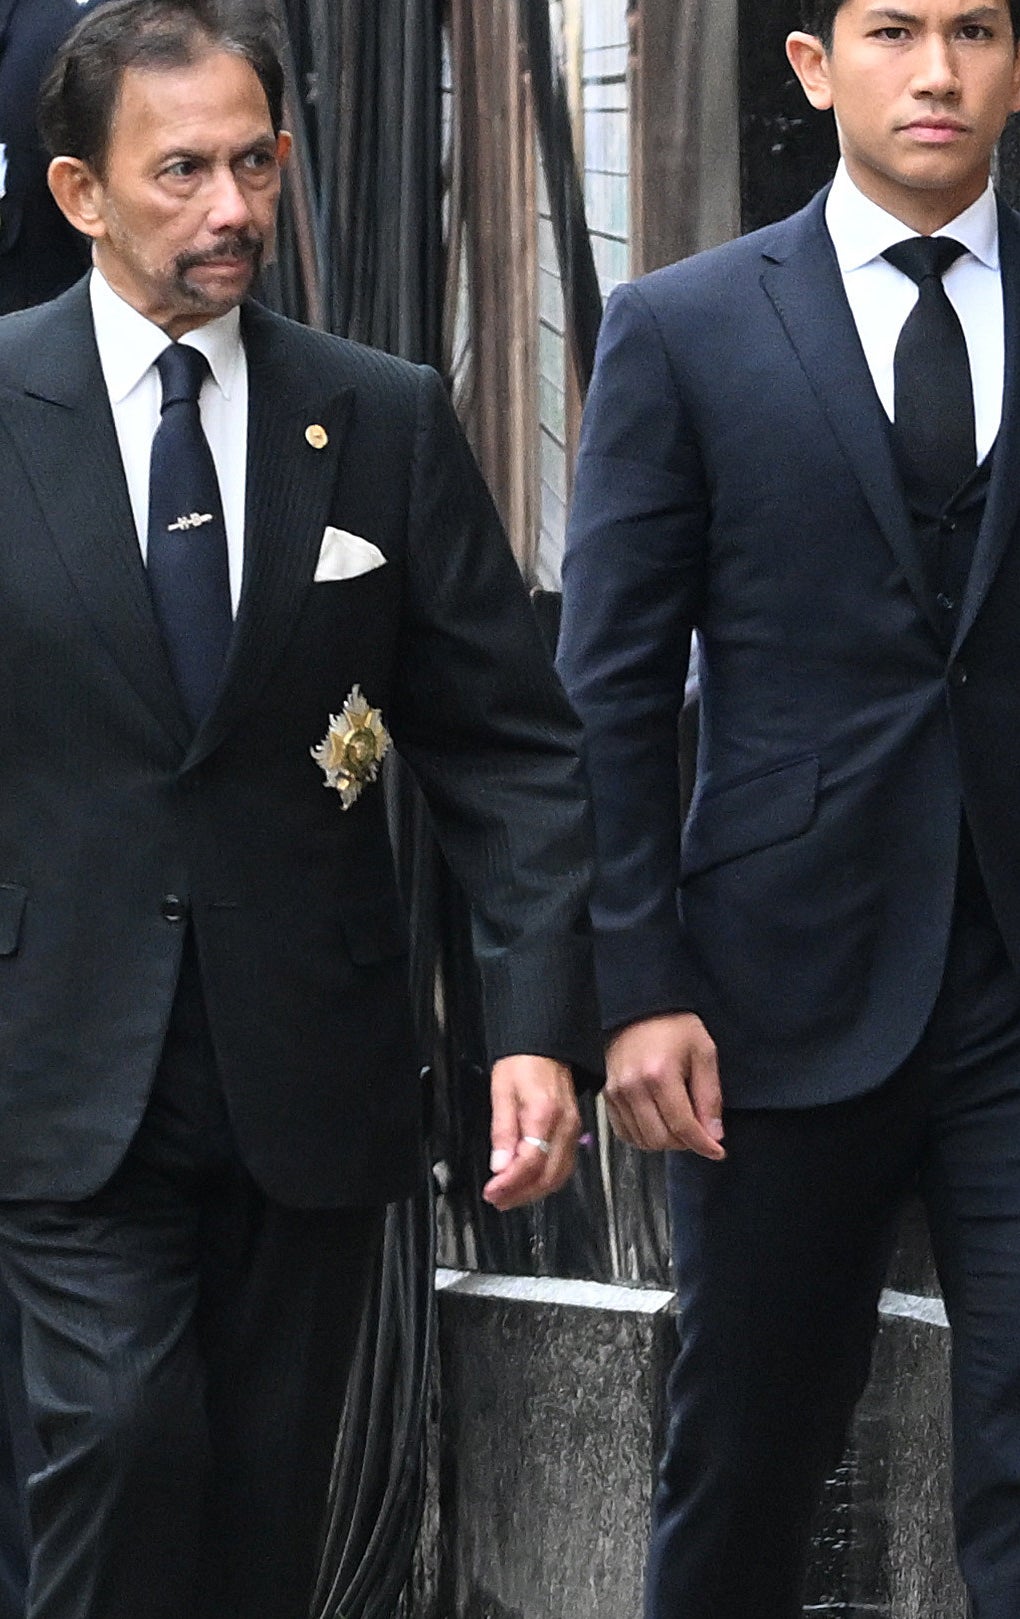 Sultan of Brunei Hassanal Bolkiah and Prince Abdul Mateen arrive for the State Funeral of Queen Elizabeth II at Westminster Abbey on September 19, 2022